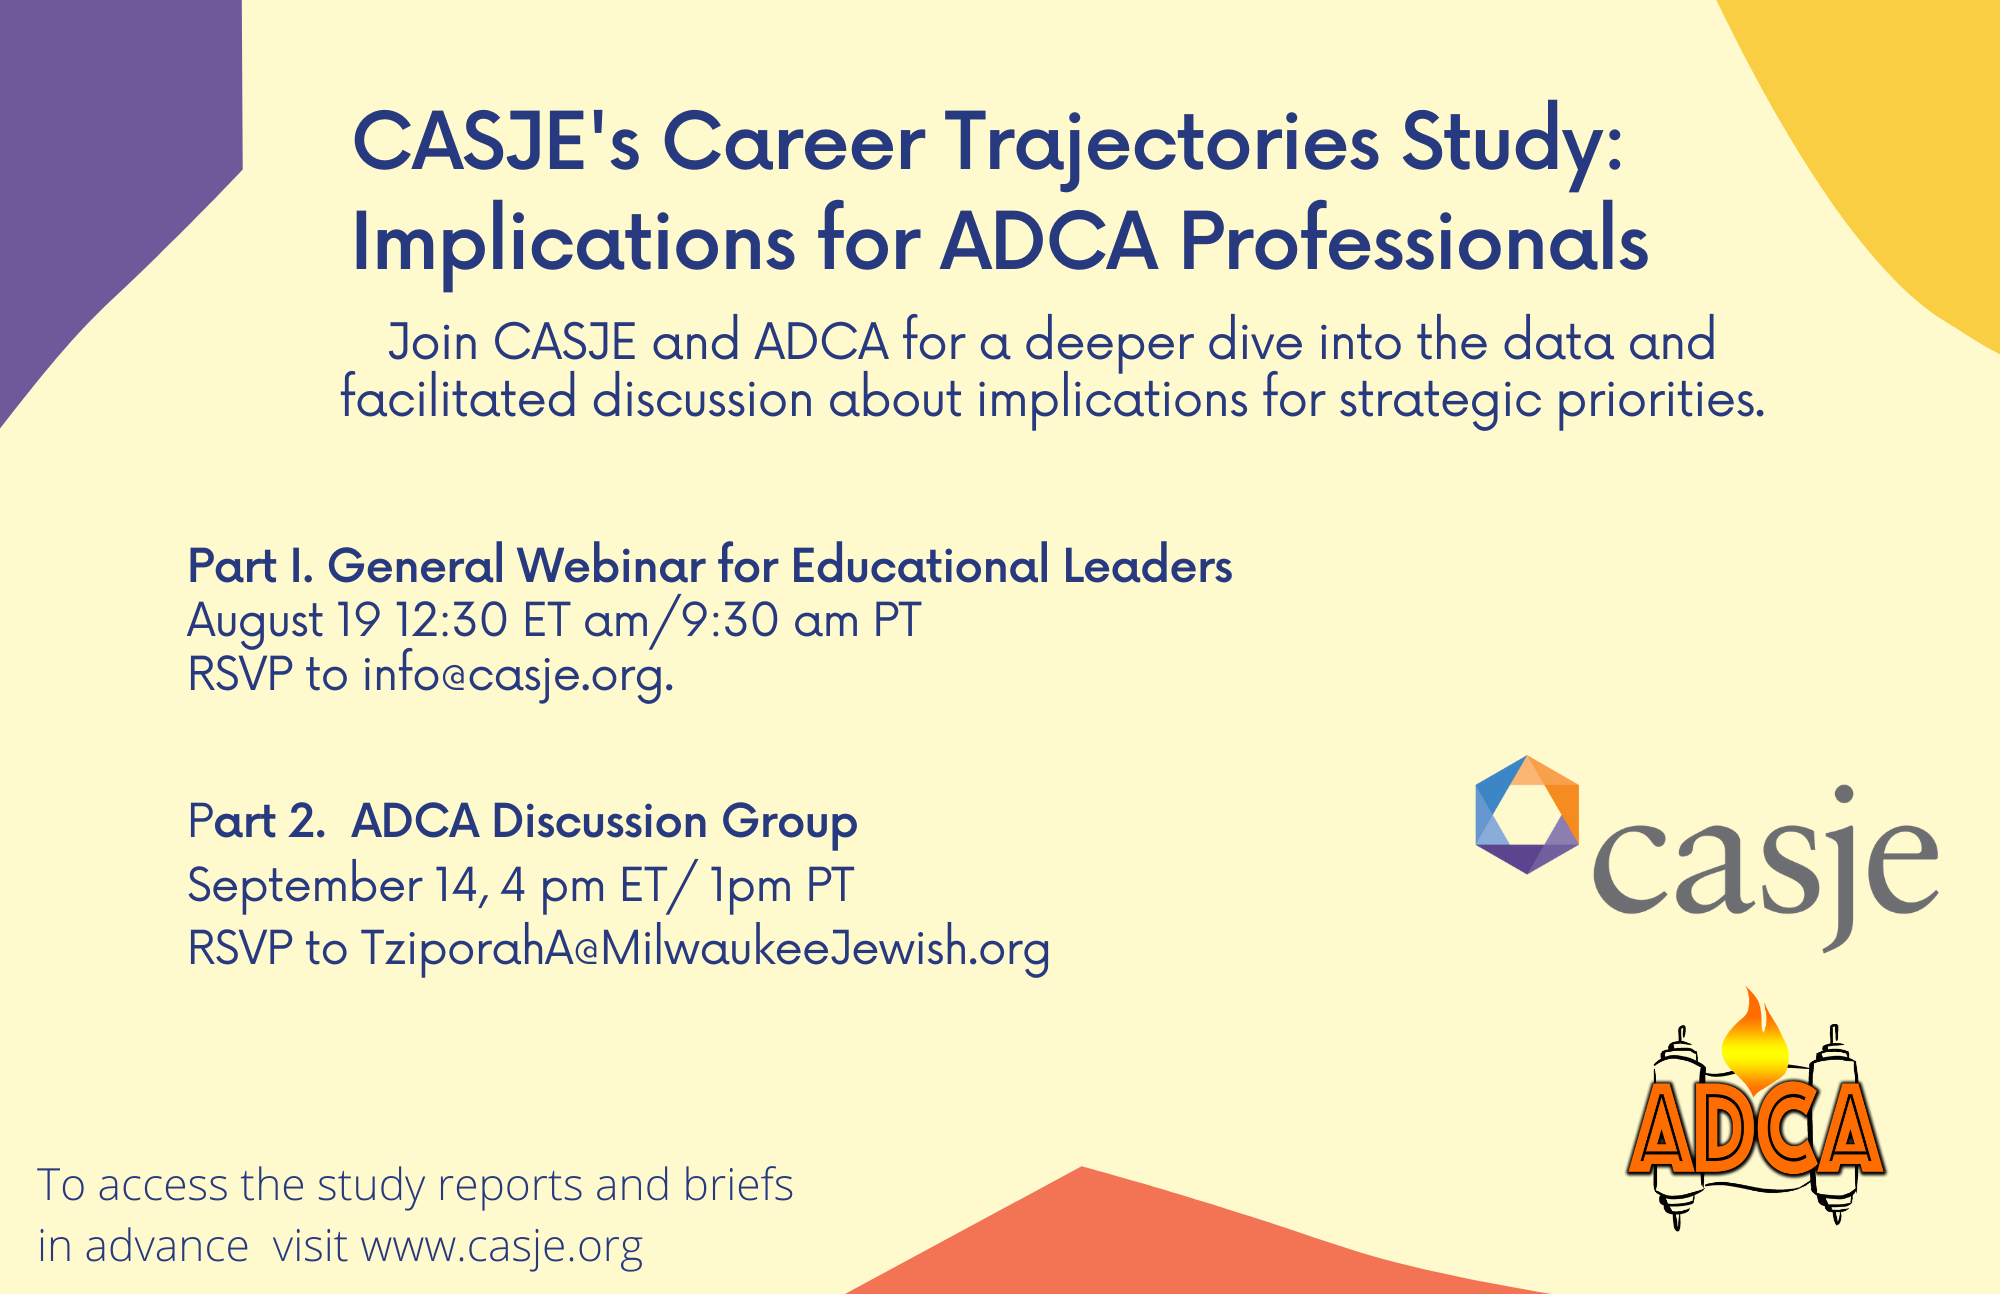 Join CASJE and ADCA for a deeper dive into the Career Trajectories data and facilitated discussion about implications for strategic priorities.